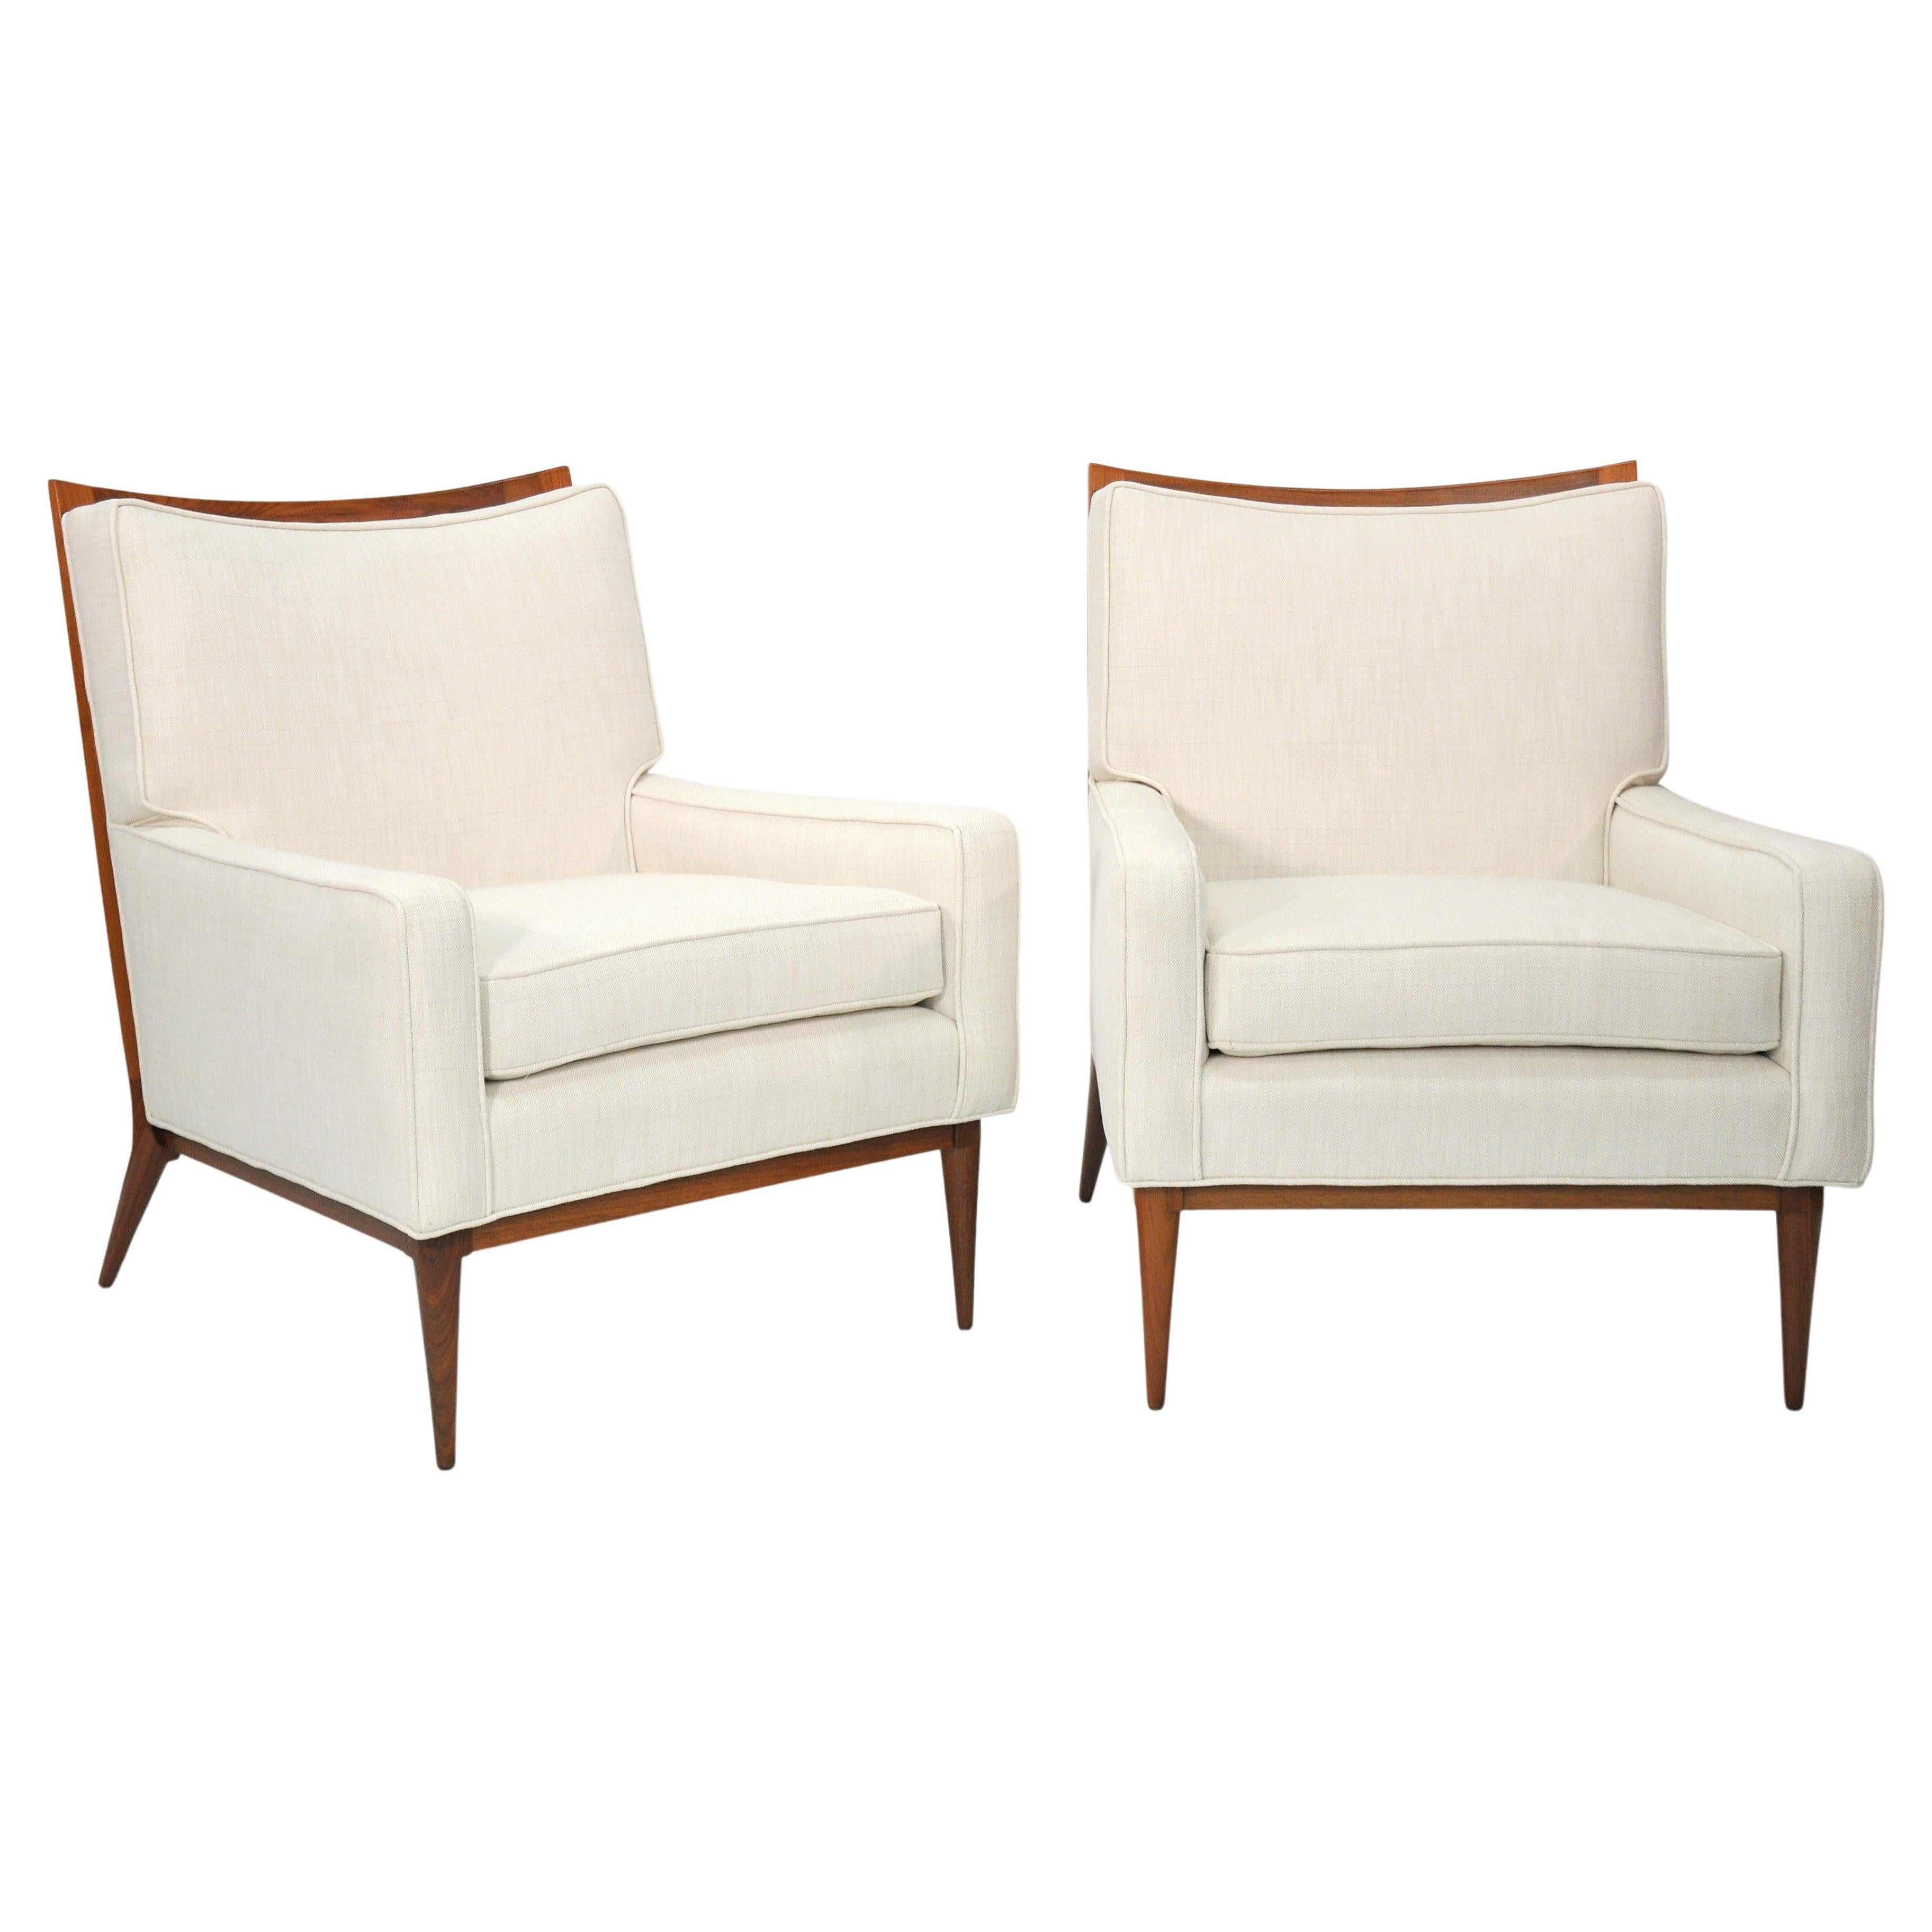 Pair of Paul McCobb White Lounge Chairs for Directional, 1950s 1